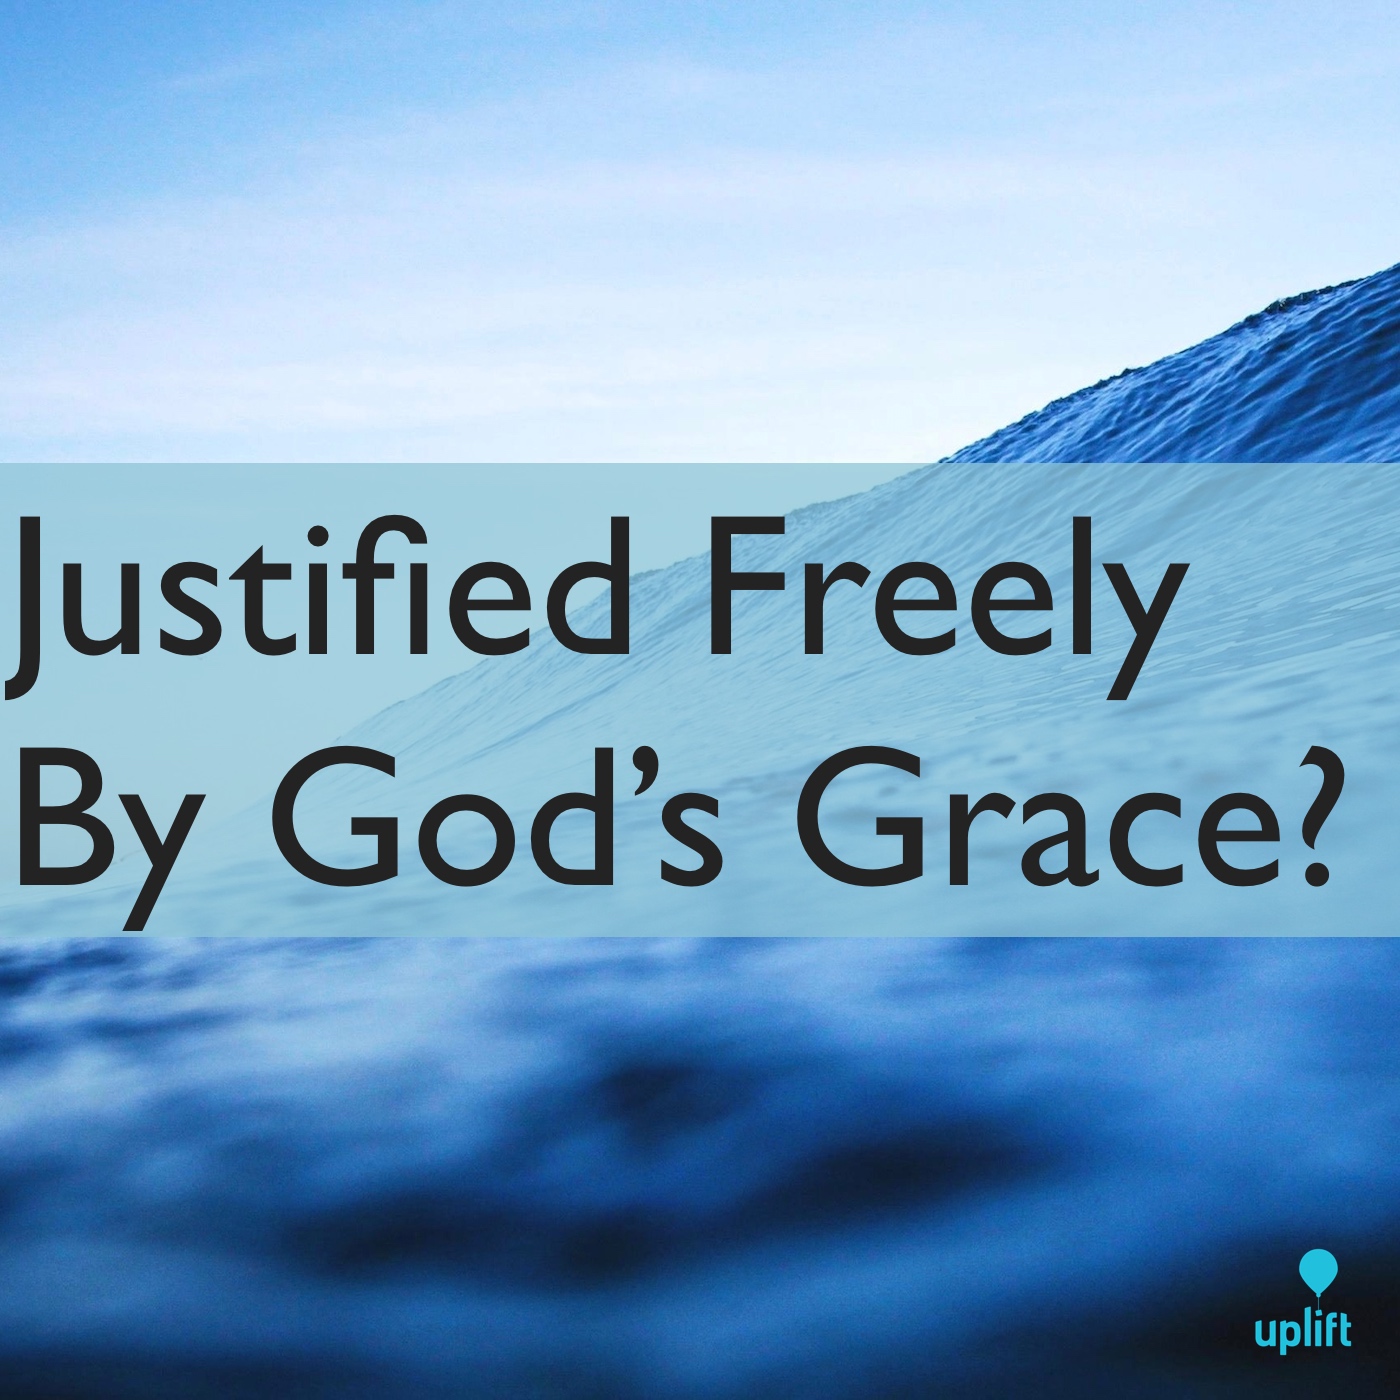 Episode 58: Justified Freely By God's Grace?